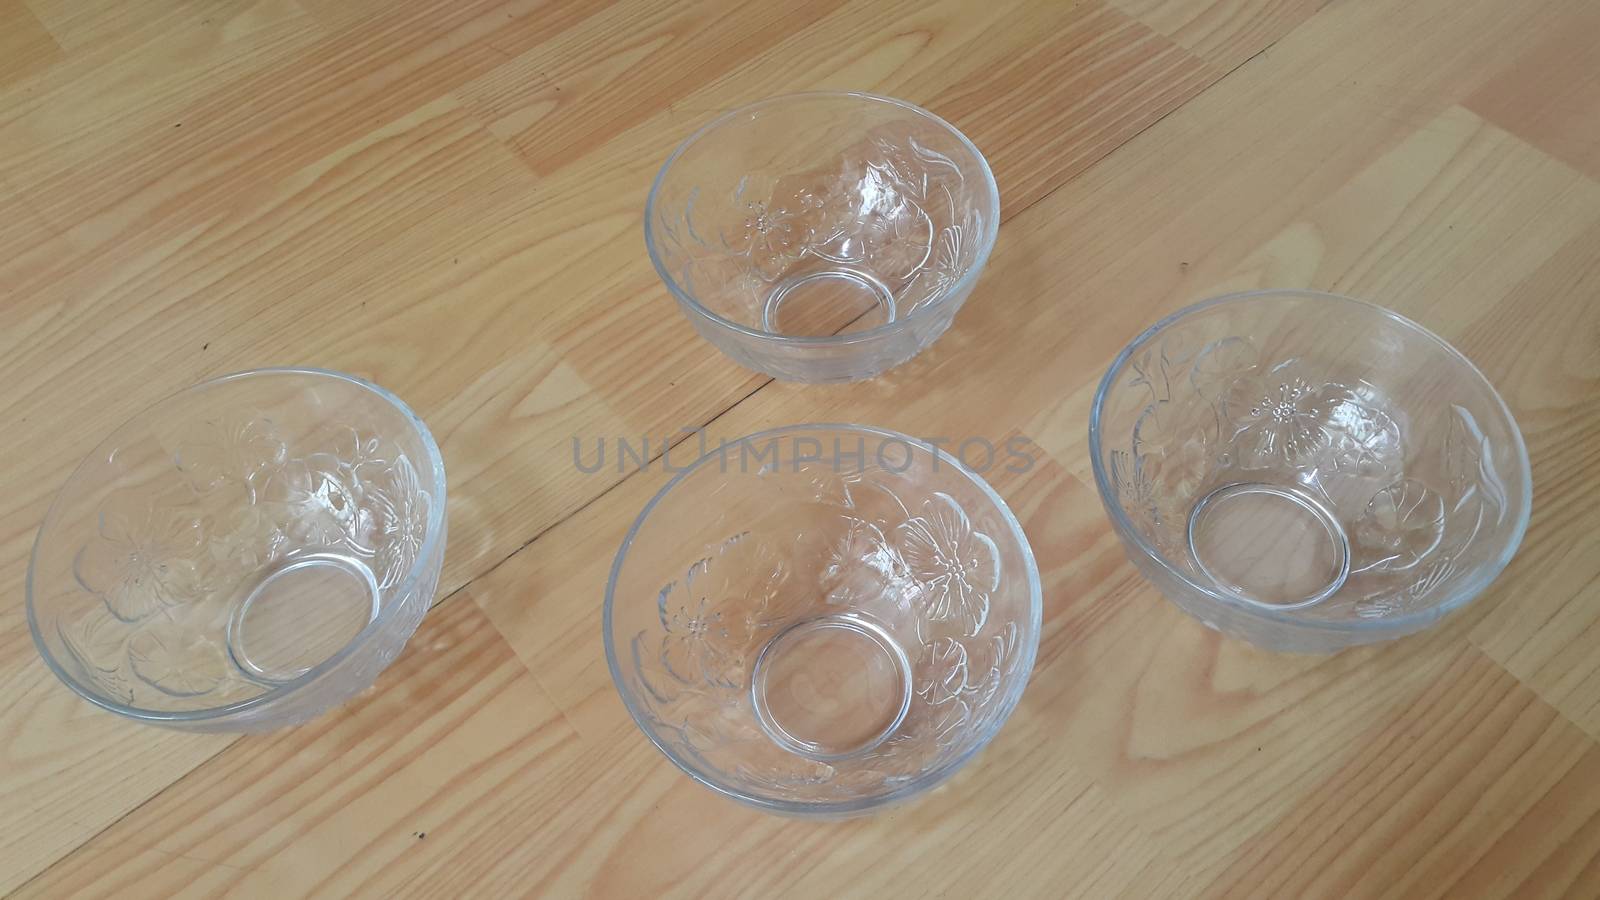 Top view of empty white glass bowls on a wooden floor. Glass bowl with flowers made on its wall